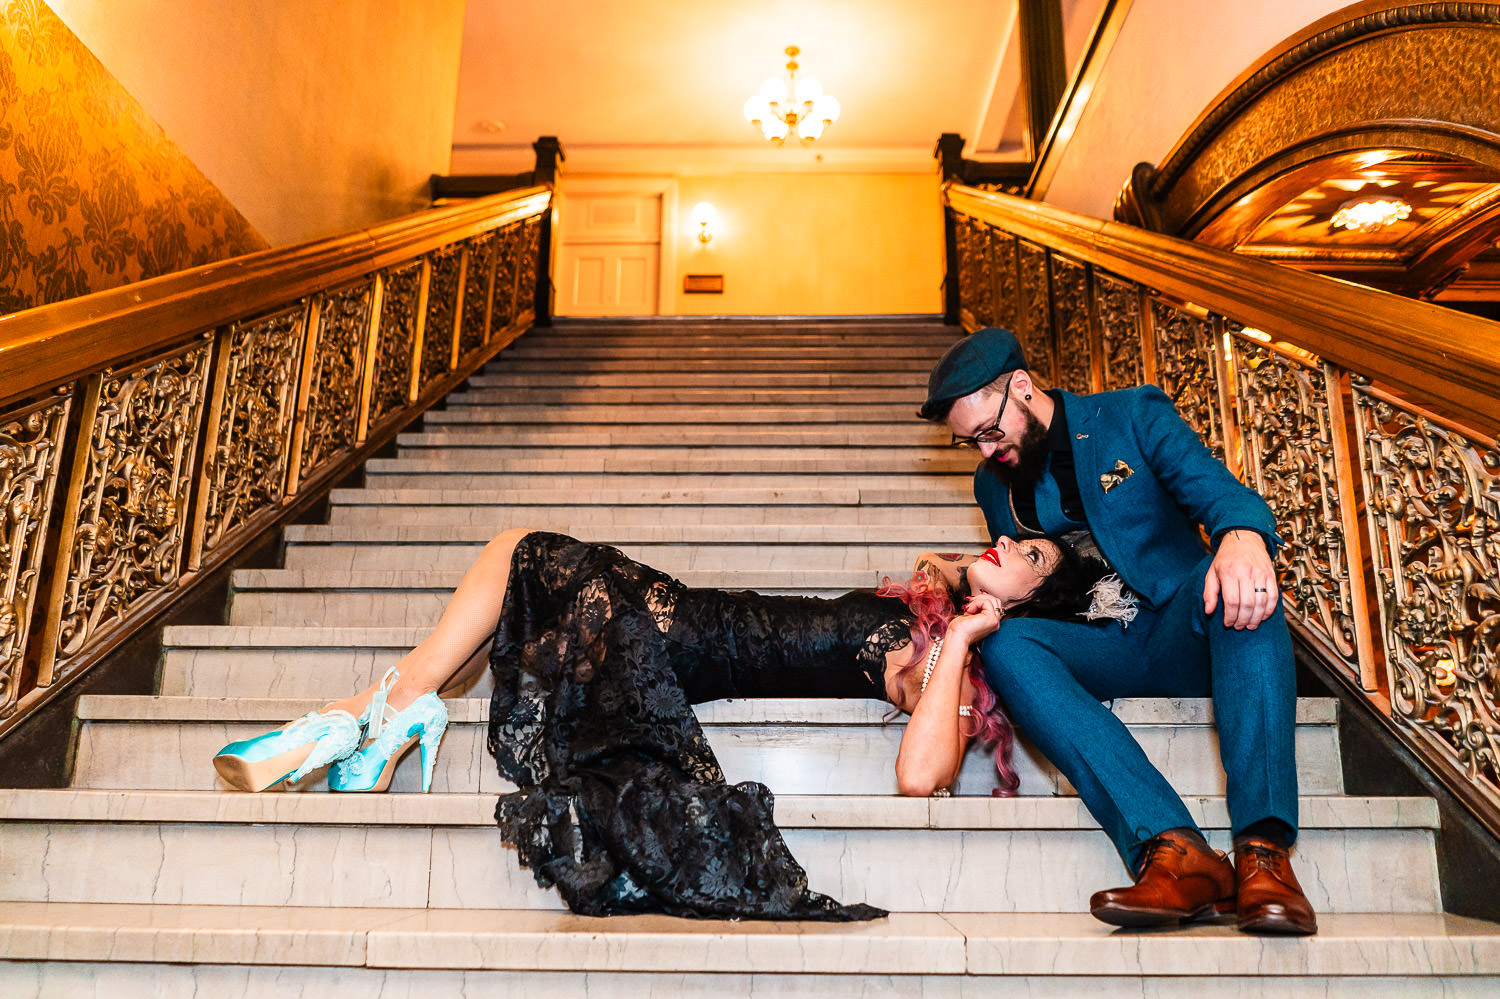 A bride in a black wedding dress lays across a step of an ornate staircase and into the lap of her groom as they gaze in each other's eyes during their 1920s-themed Brown Palace wedding in Denver, Colorado.